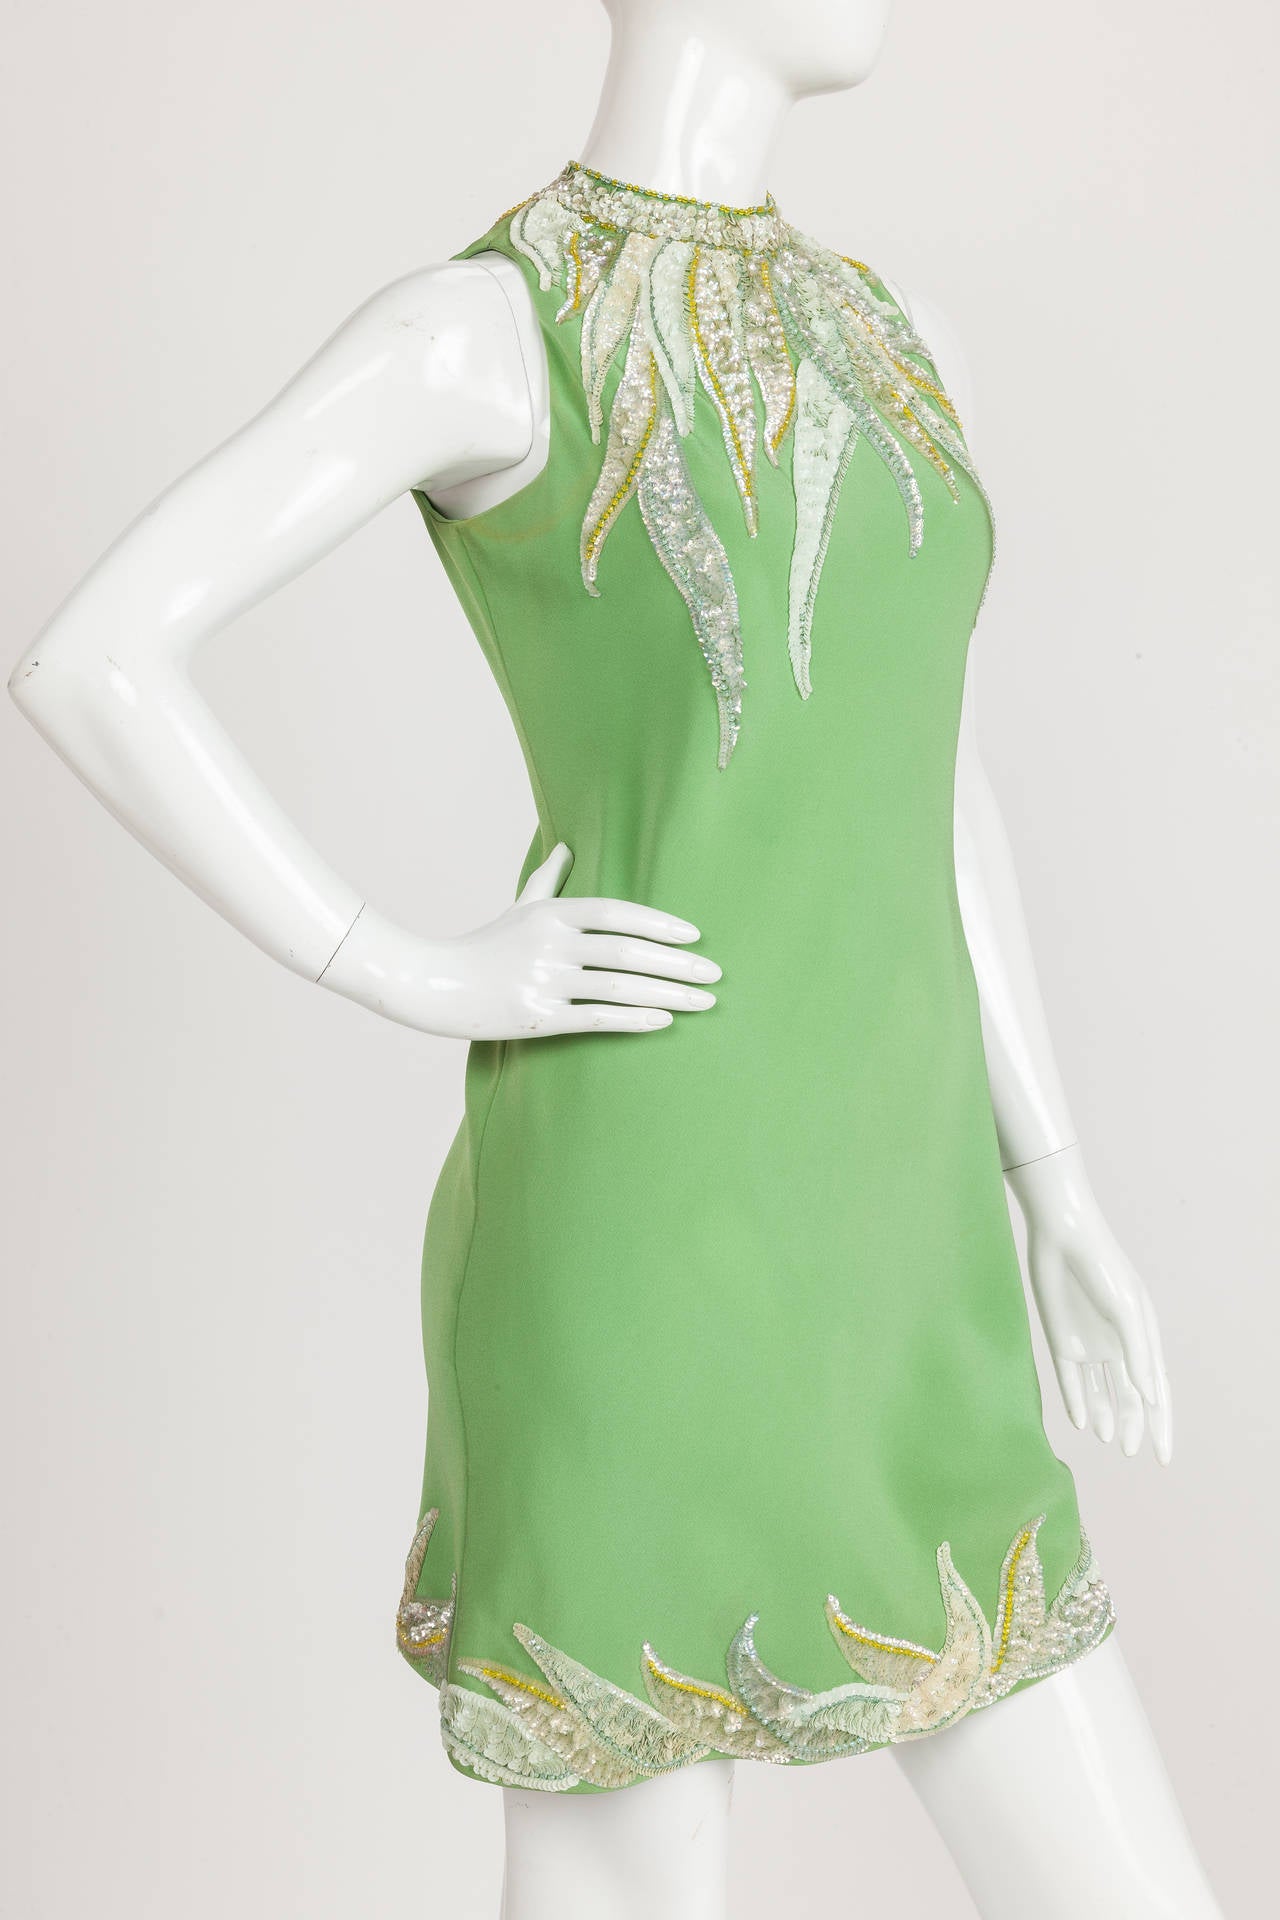 A circa 1967 Pierre Cardin haute couture green sequined silk crêpe cocktail dress that features a keyhole opening at the back. The main draw of this slinky silk cocktail dress are the shades of yellow, green and light violet appliquéd and